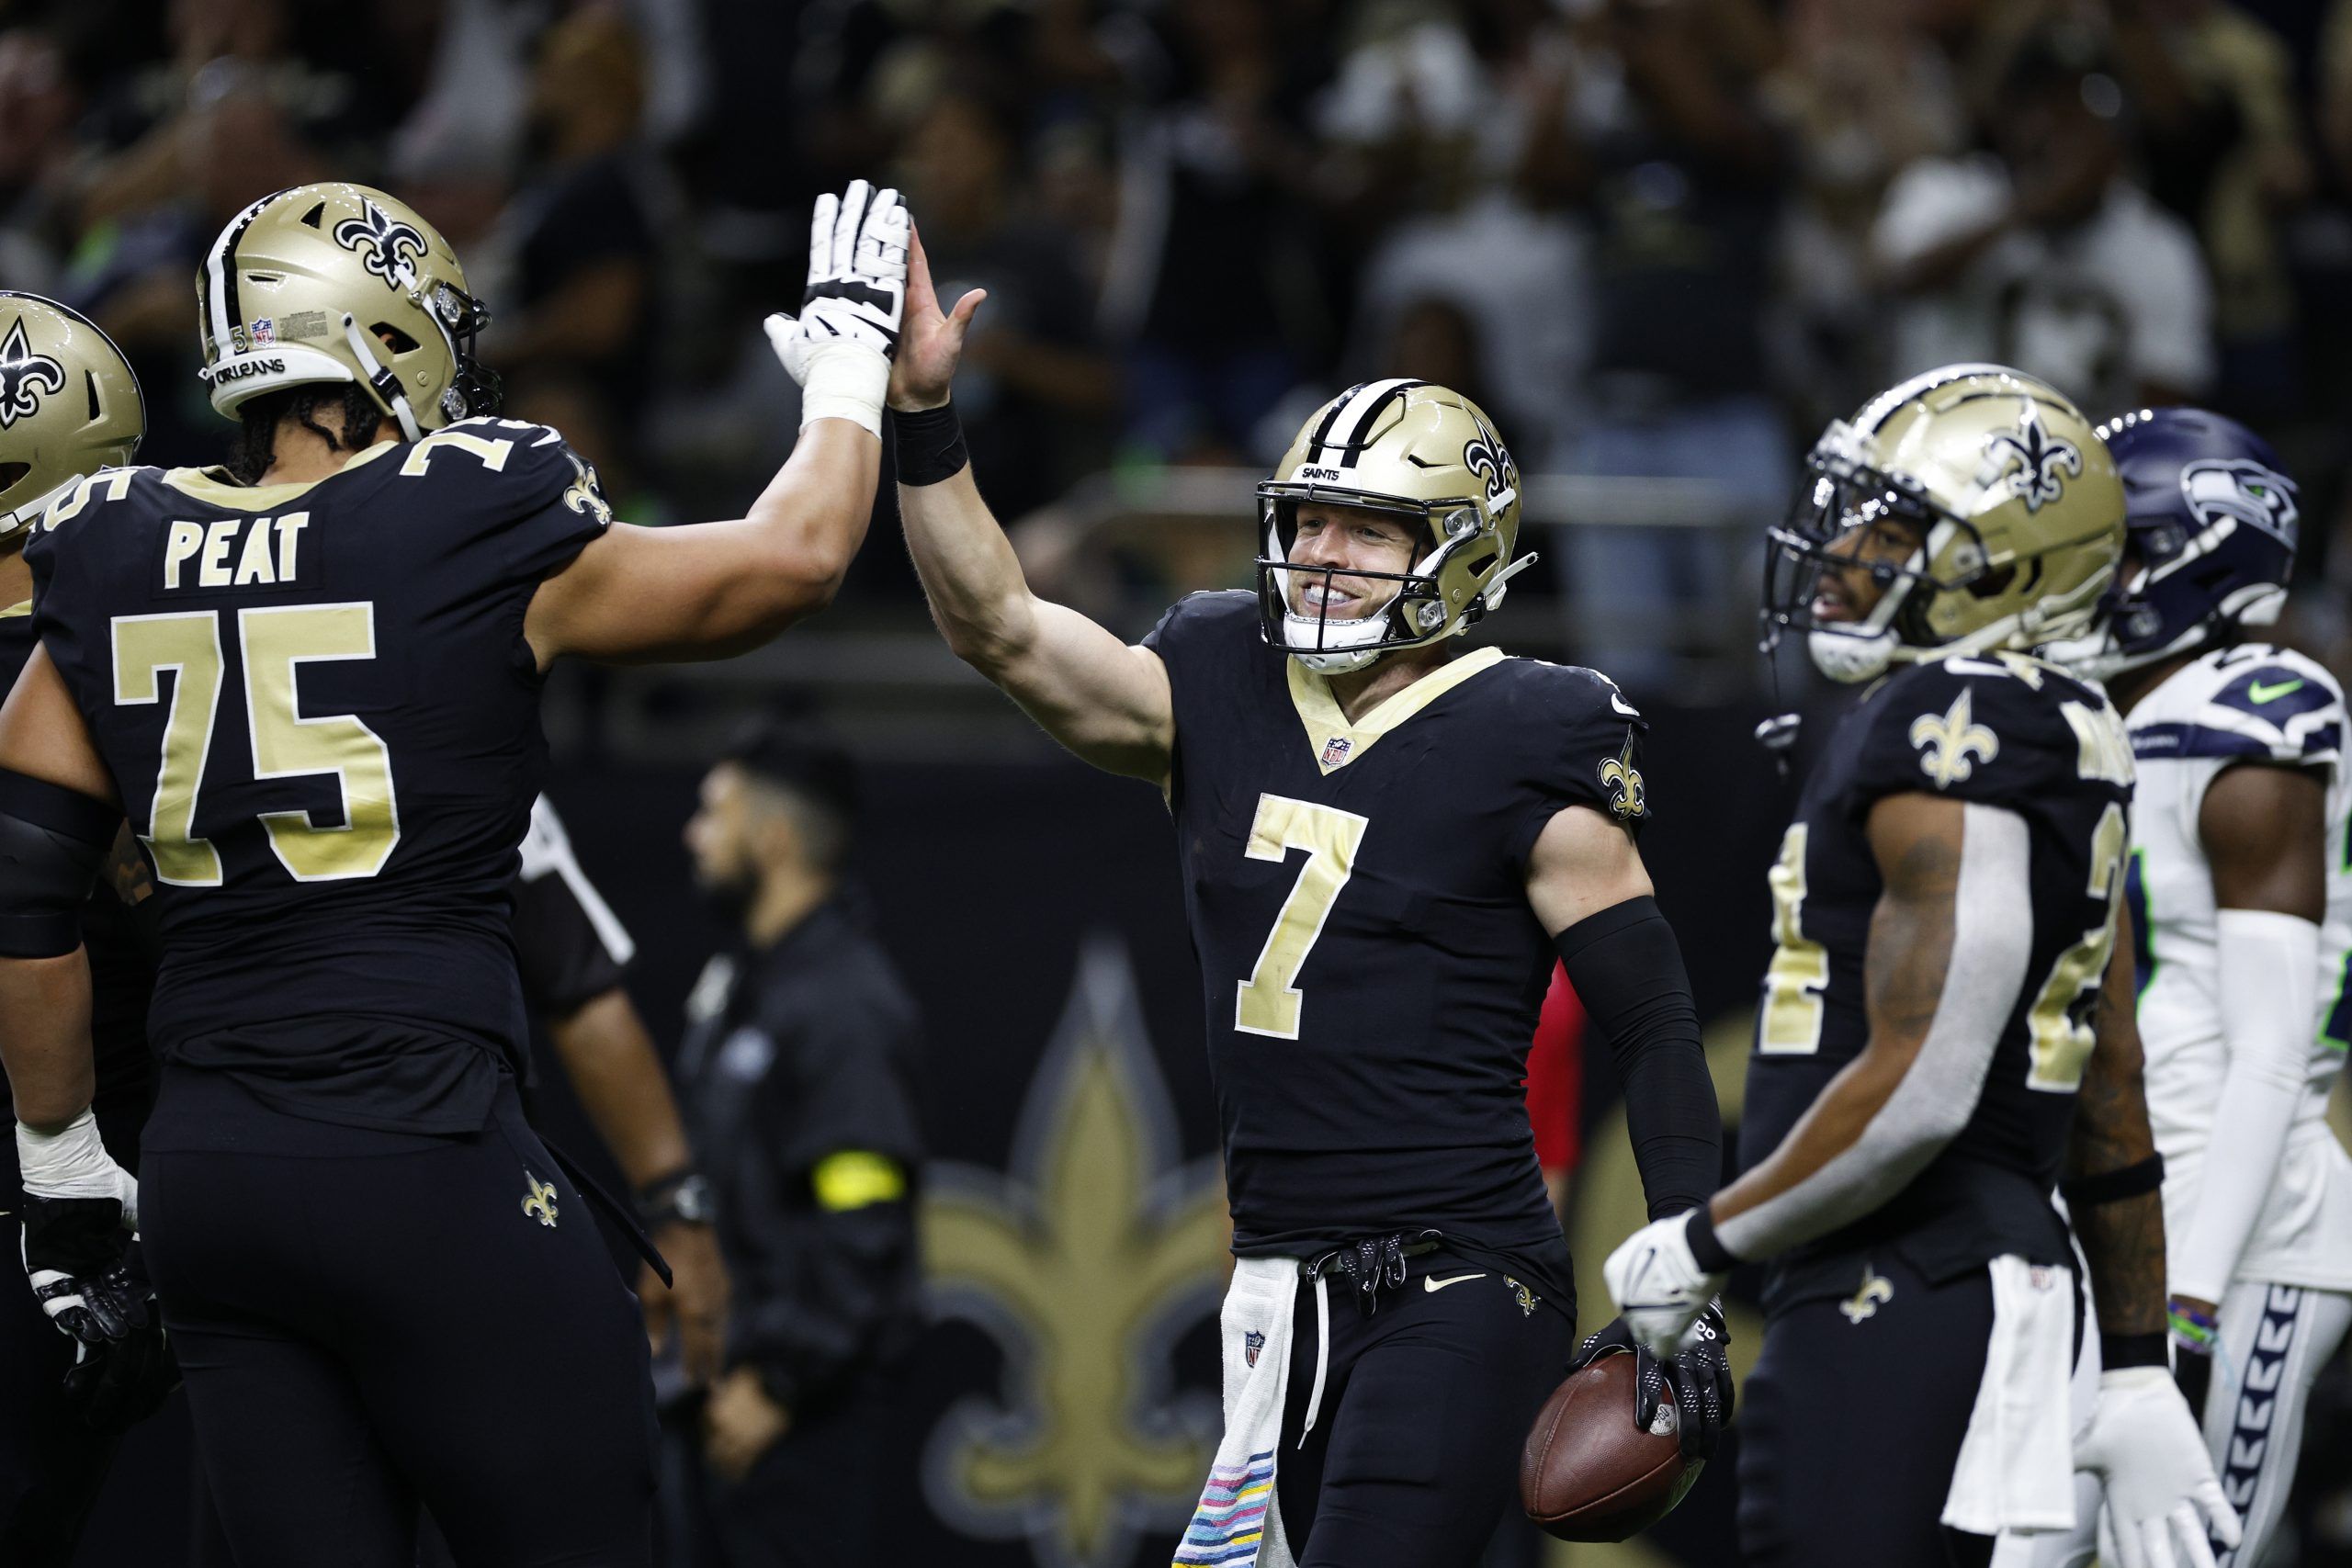 FANTASY FOOTBALL: Taysom Hill puts on a show to lead our Week 5